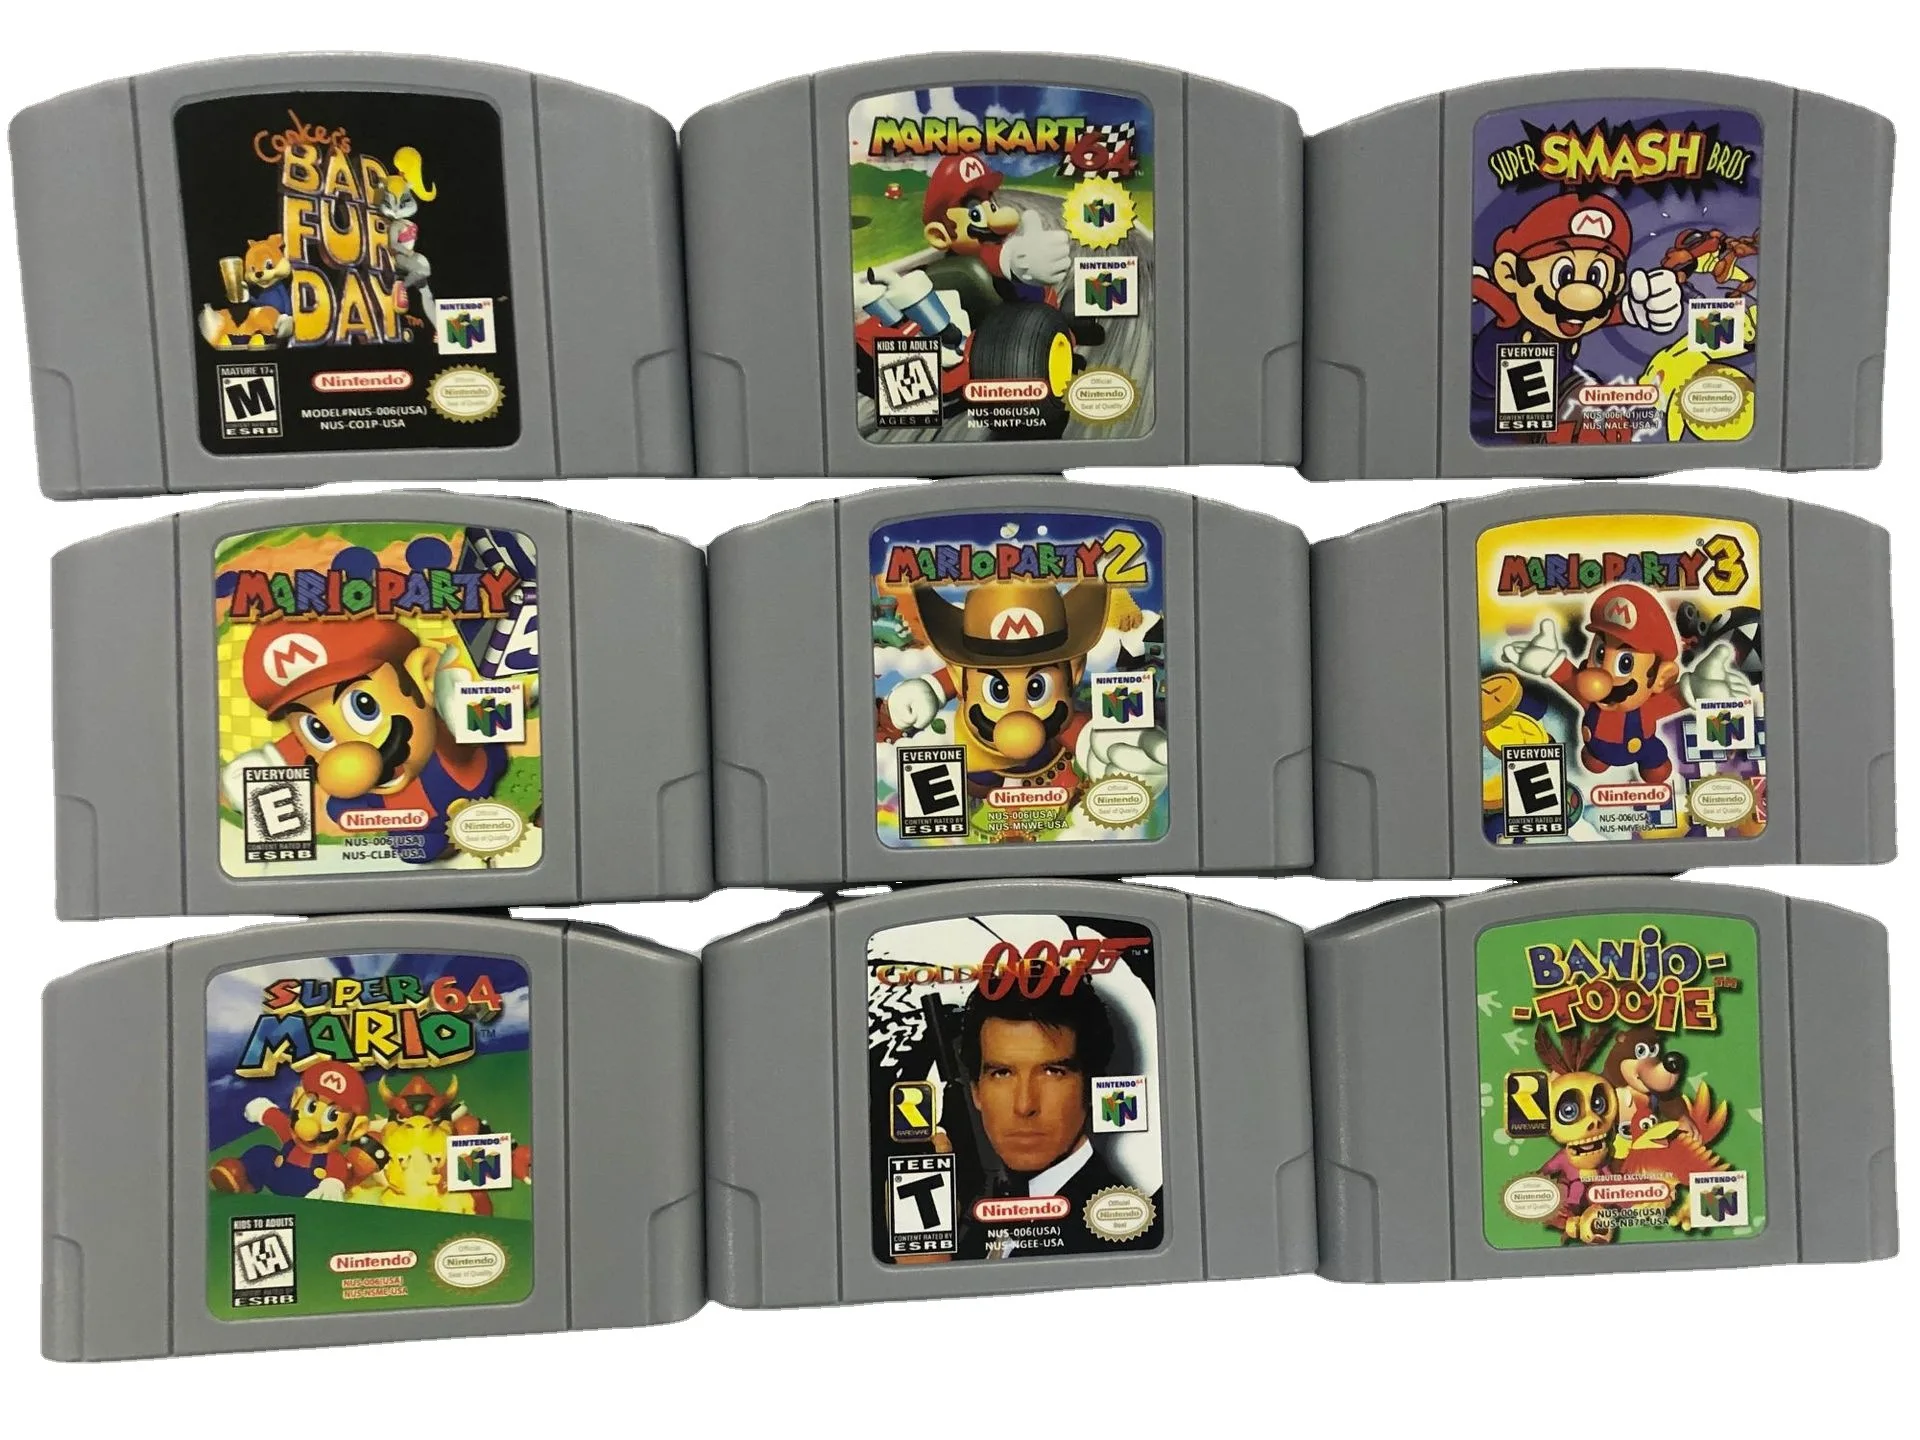 High quality game cards for n64 game cartridges, retro Zelda video game cards, game cards for Nintendo 64